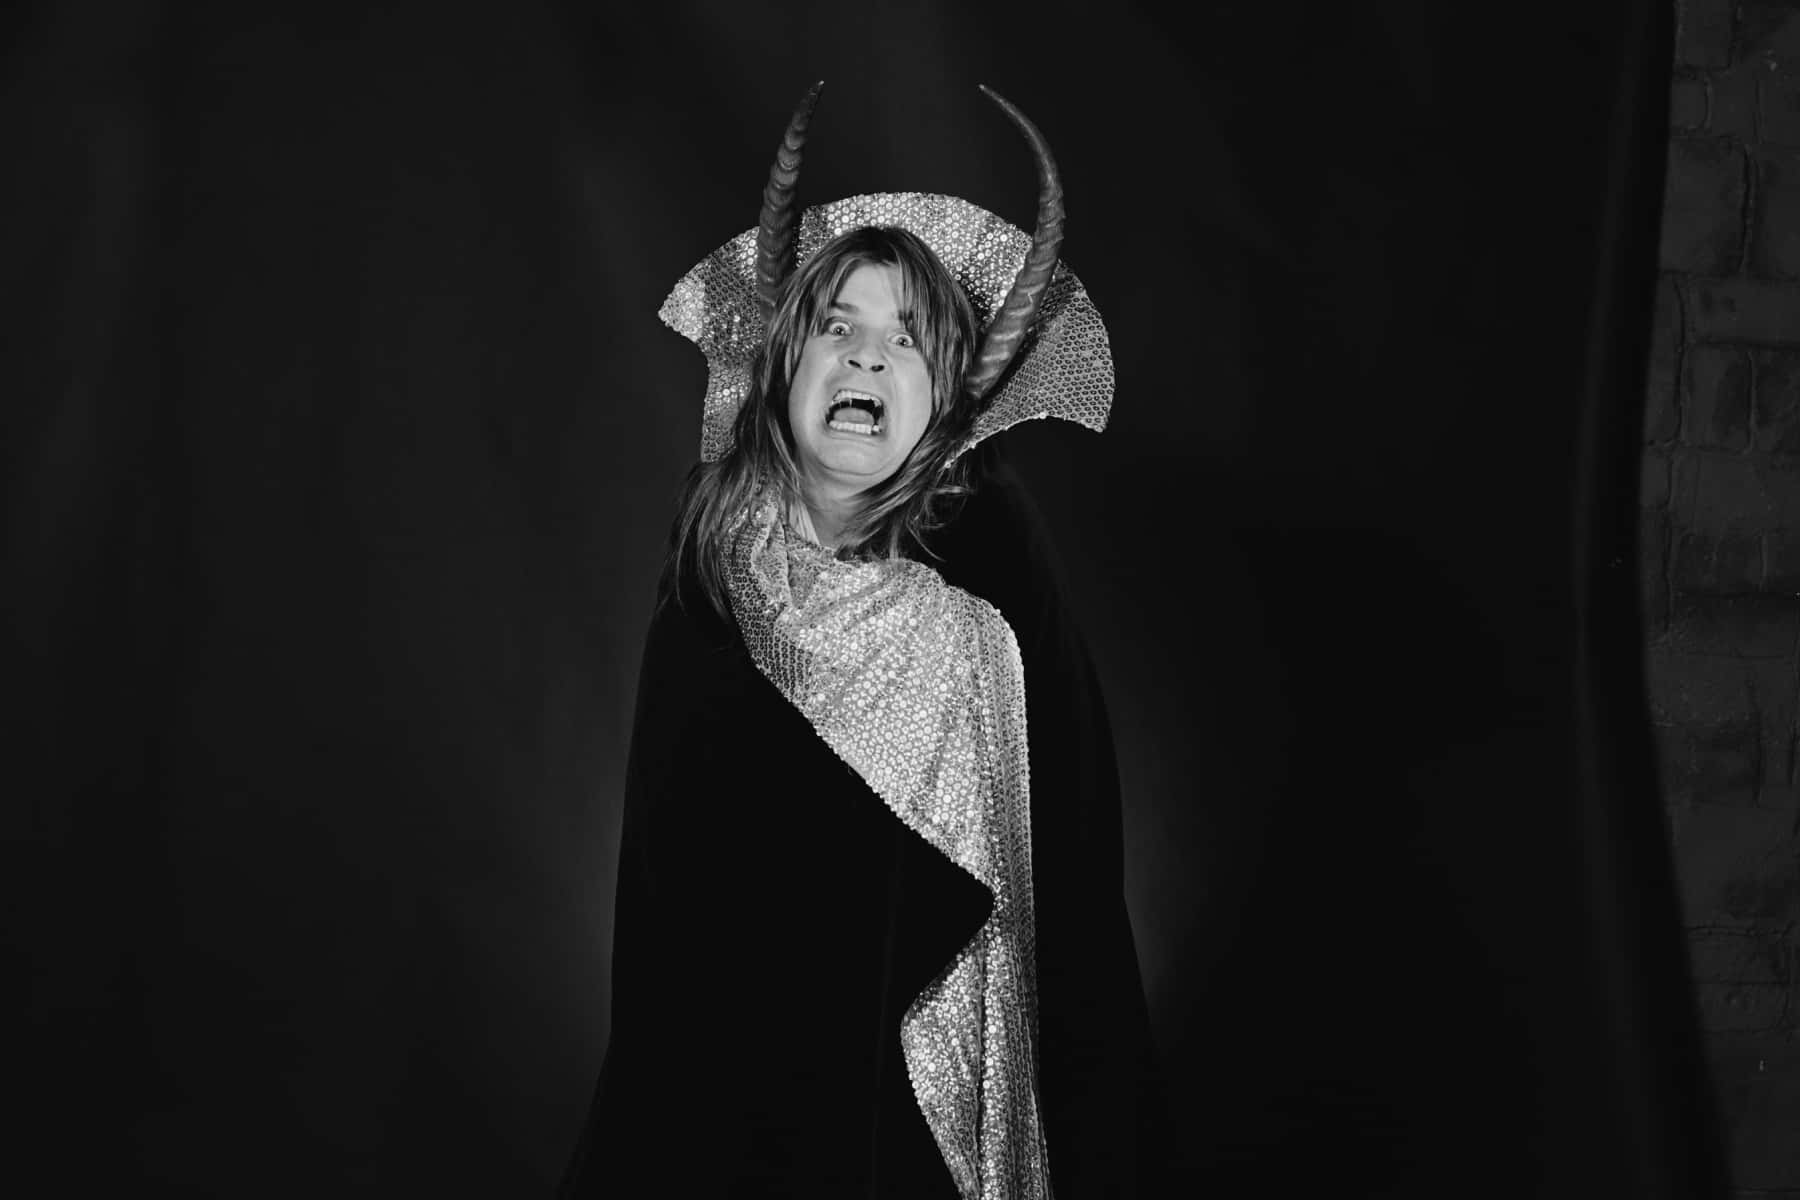 A Woman In A Black And White Photo With Horns